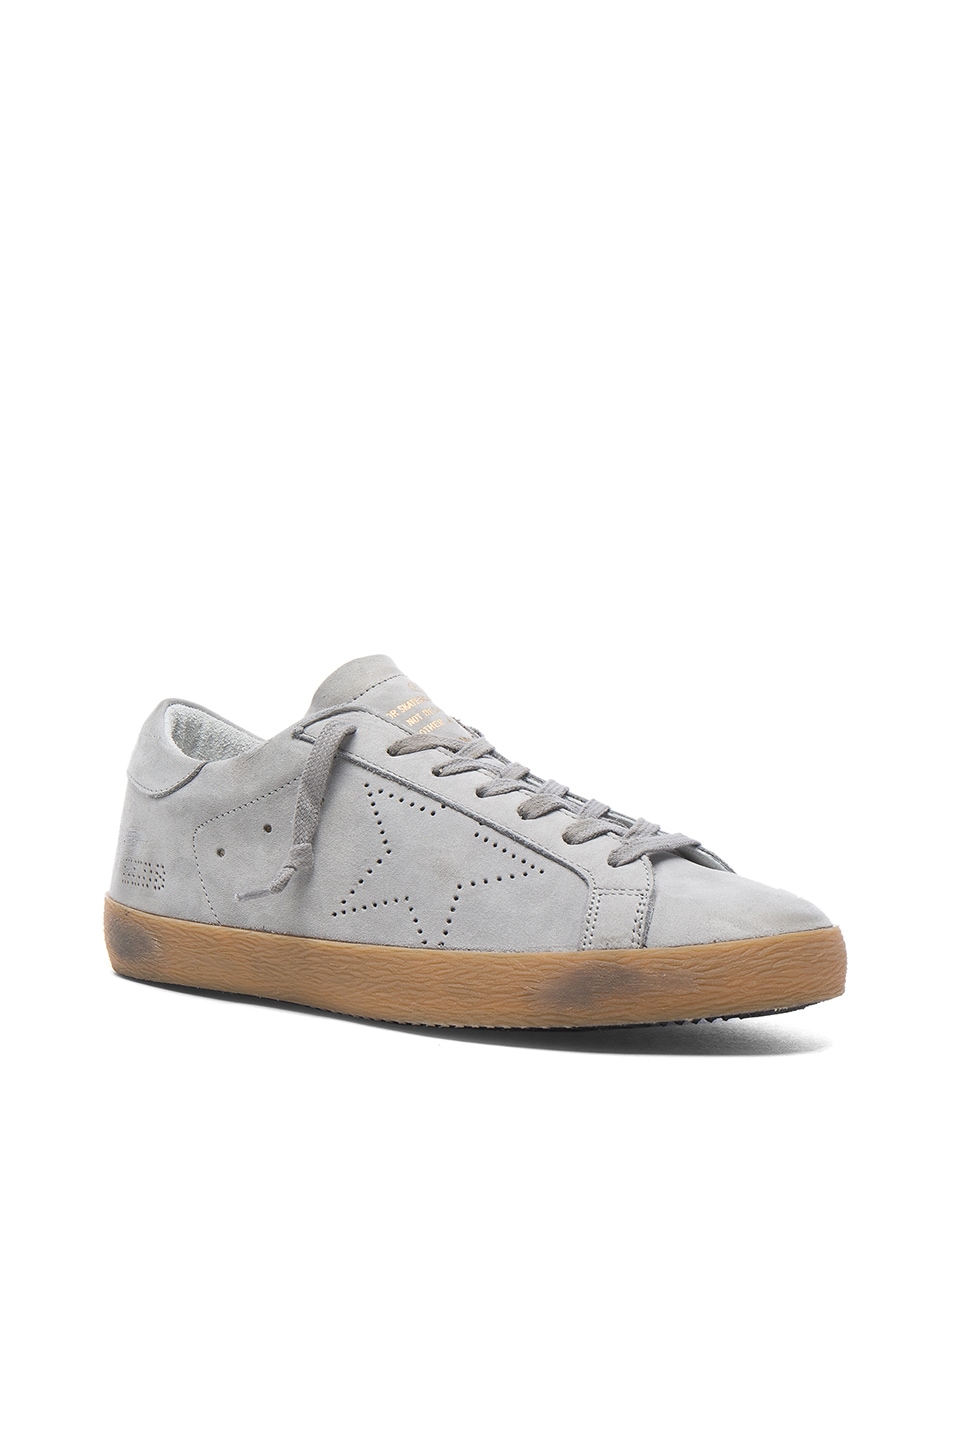 Image 1 of Golden Goose Leather Superstar Low Sneakers in Ice Nabuk Skate